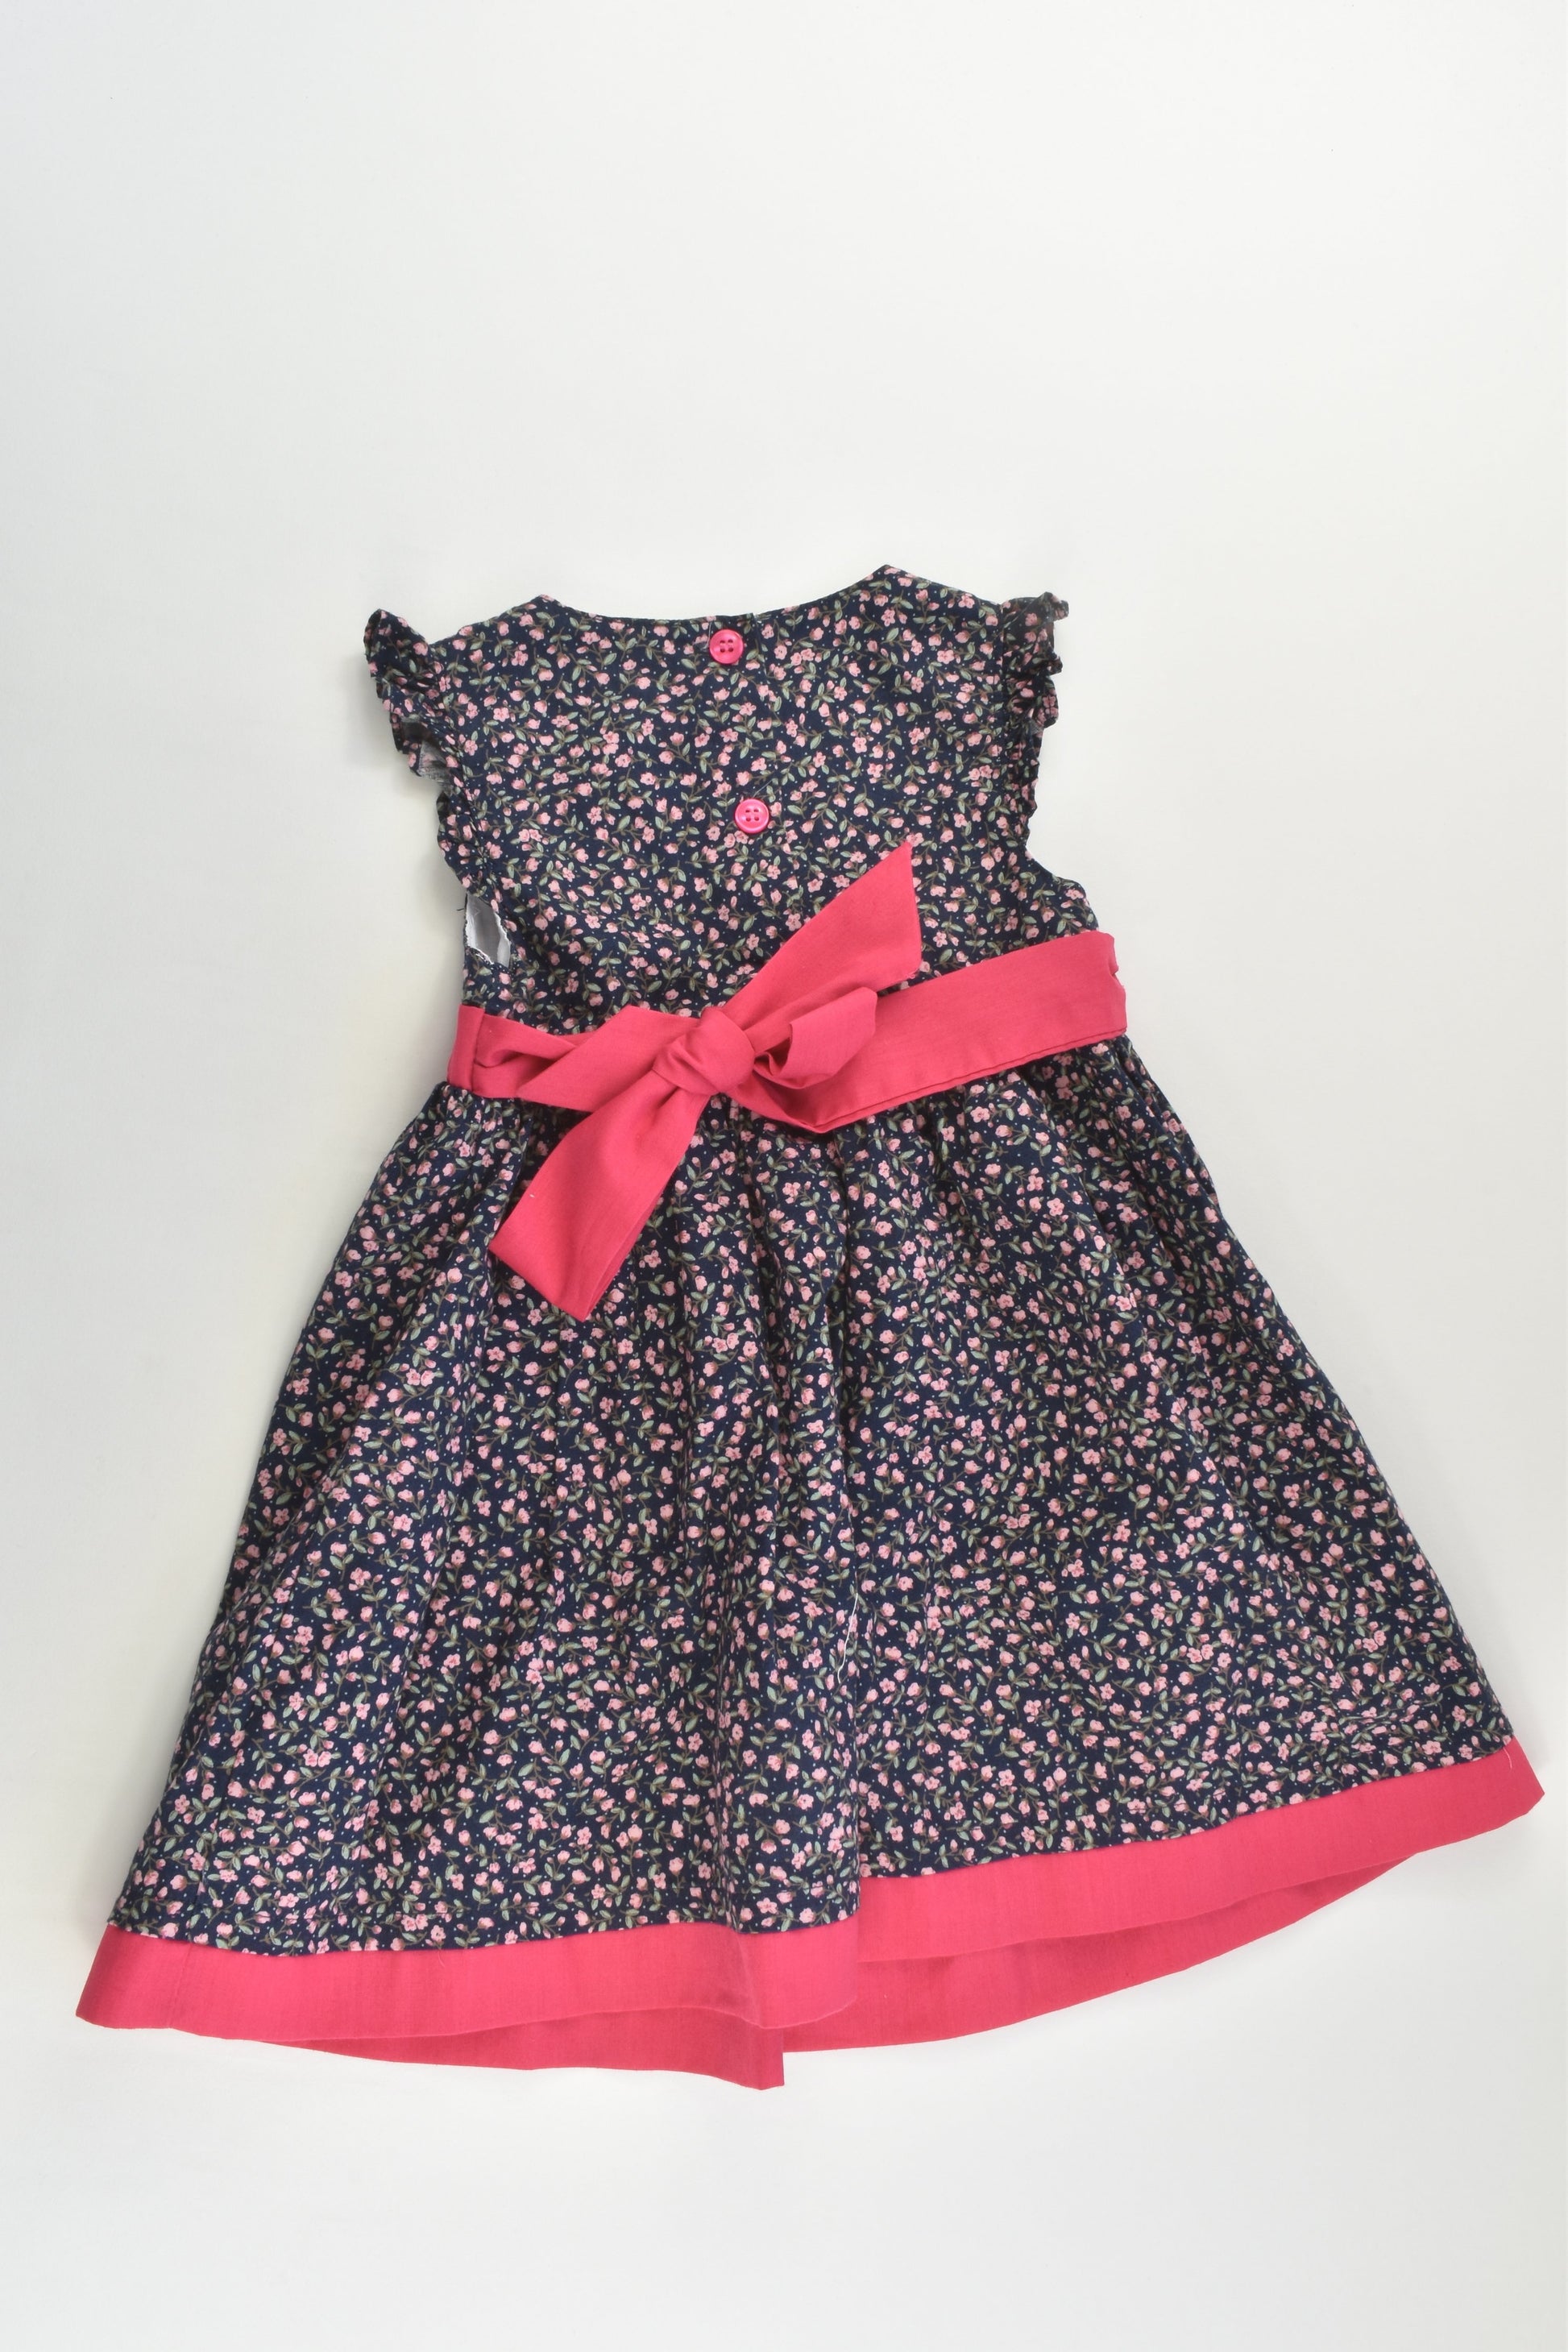 NEW Maggie & Zoe Size 1 (12-18 months, 86 cm) Lined Floral Dress